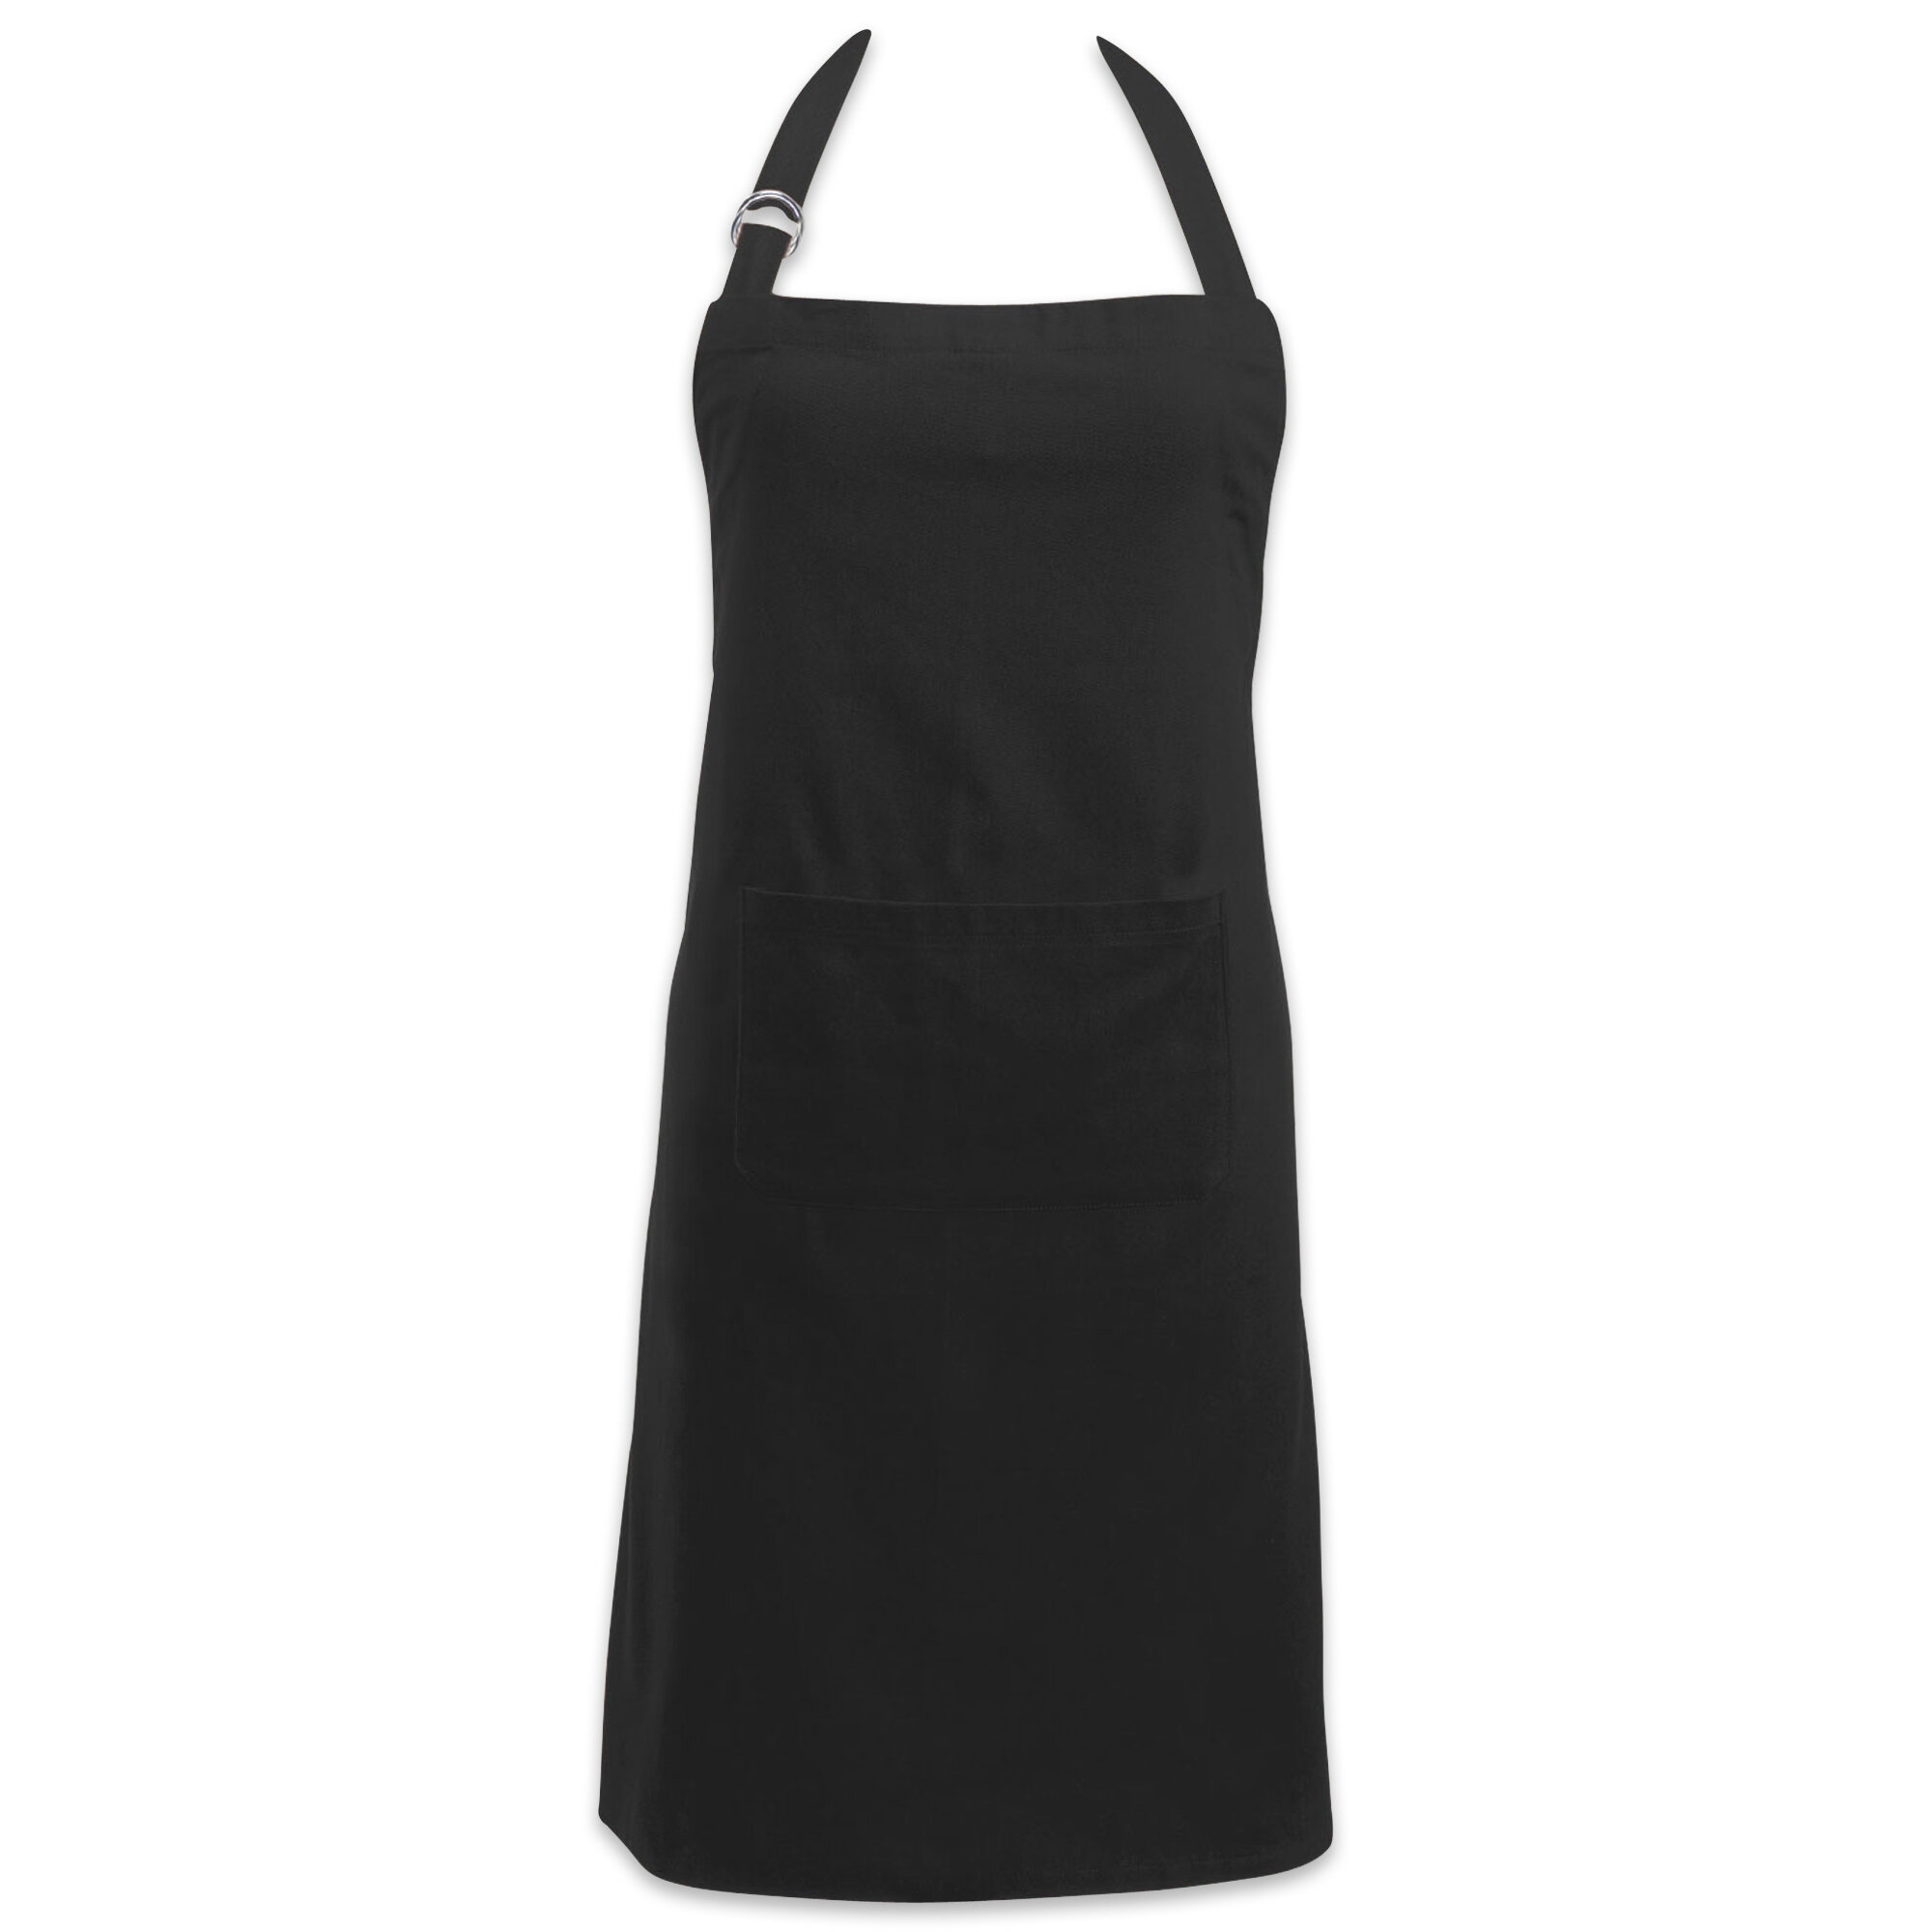 Apron Kitchen Wipeable Waterproof Oil-Proof Cooking Baking Sleeveless Aprons  For Women Baking BBQ Sleeveless Hairdresser Apron - AliExpress